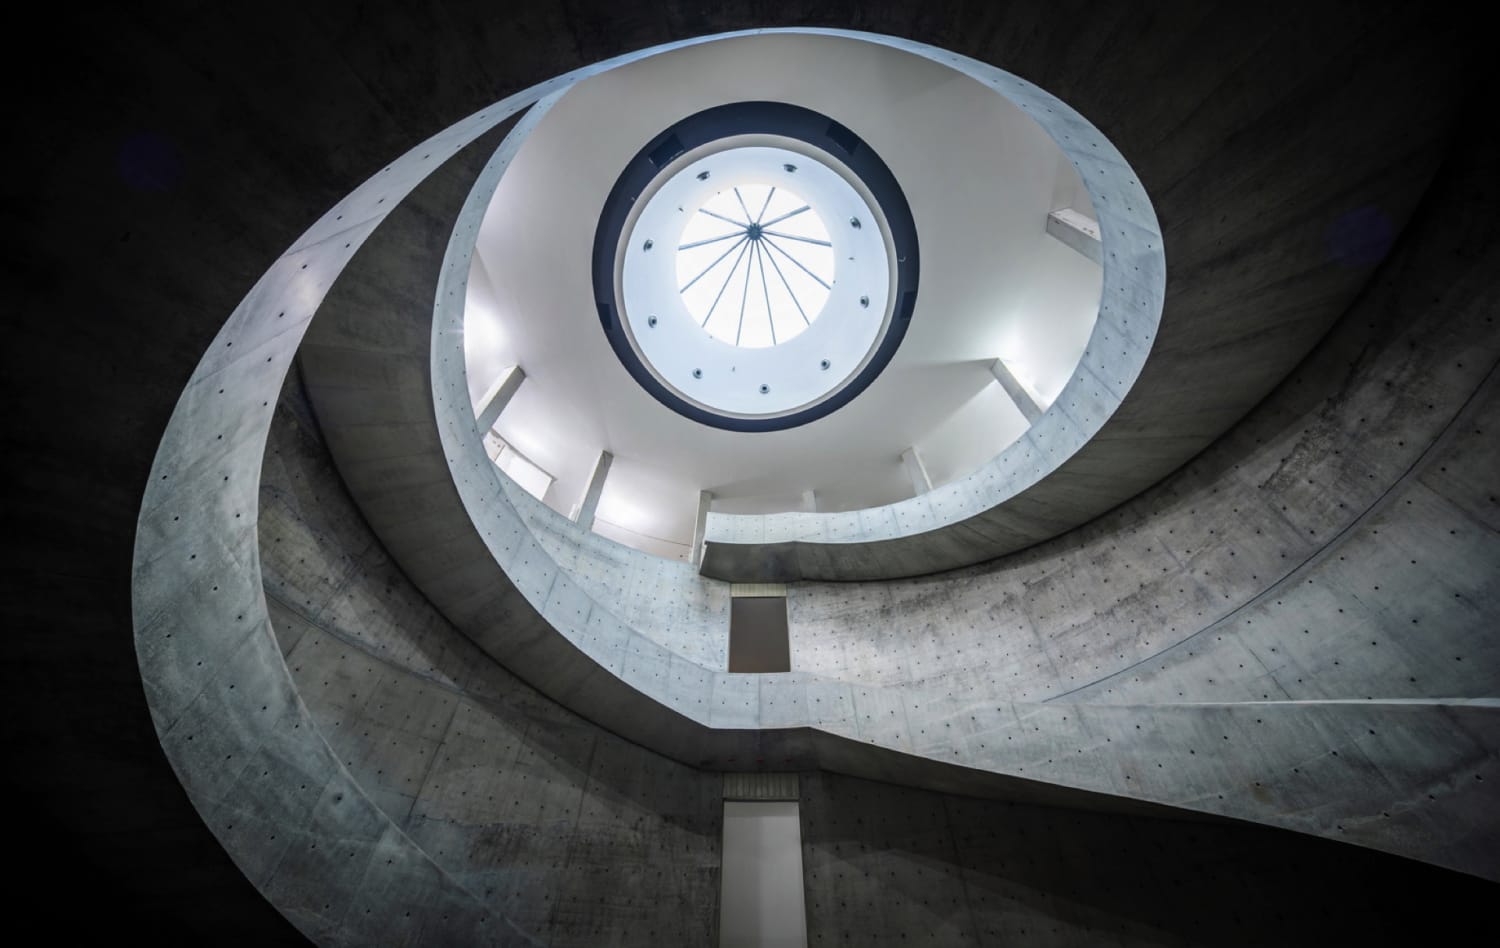 He Art Museum, the project by Tadao Ando